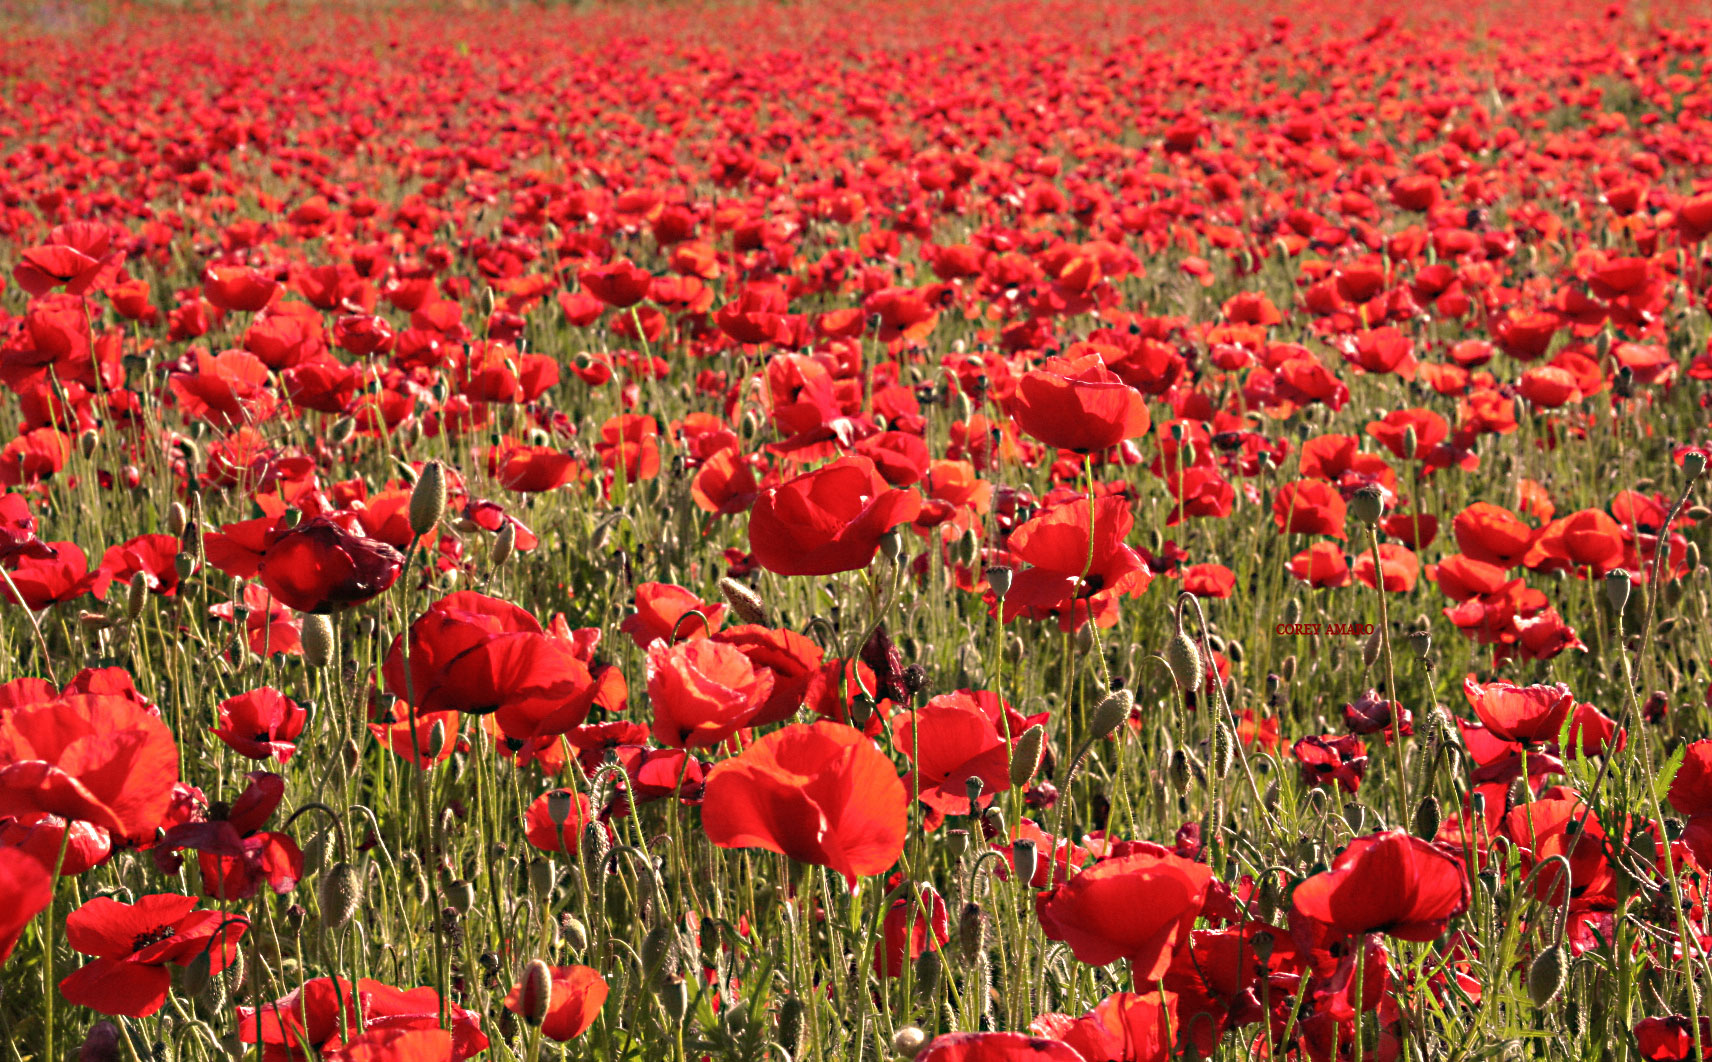 A field of red poppies in France.  Photo by Corey Amaro